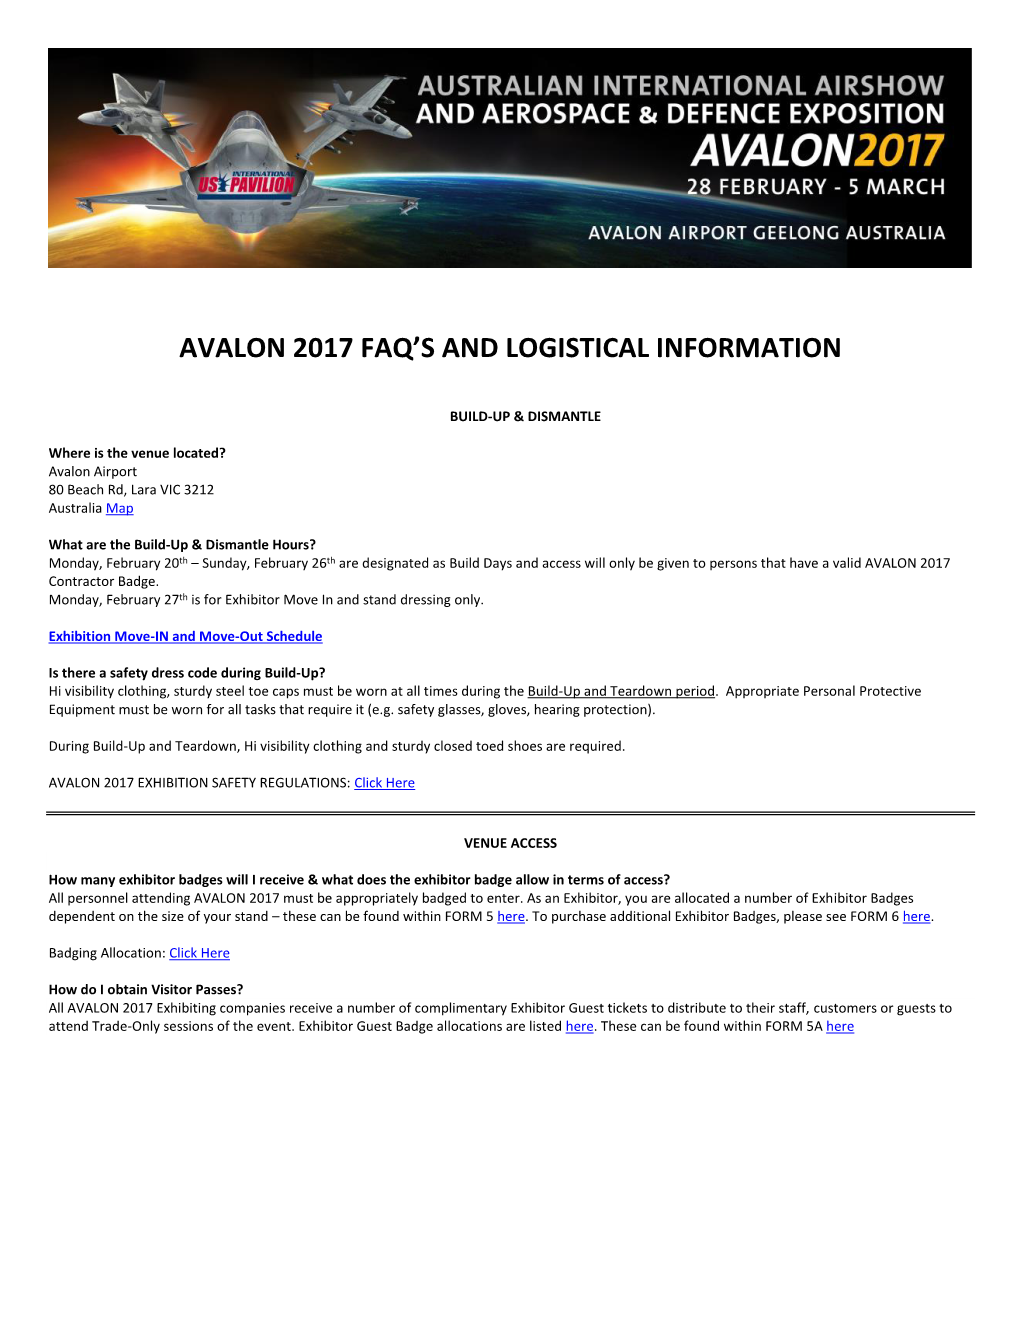 Avalon 2017 Faq's and Logistical Information